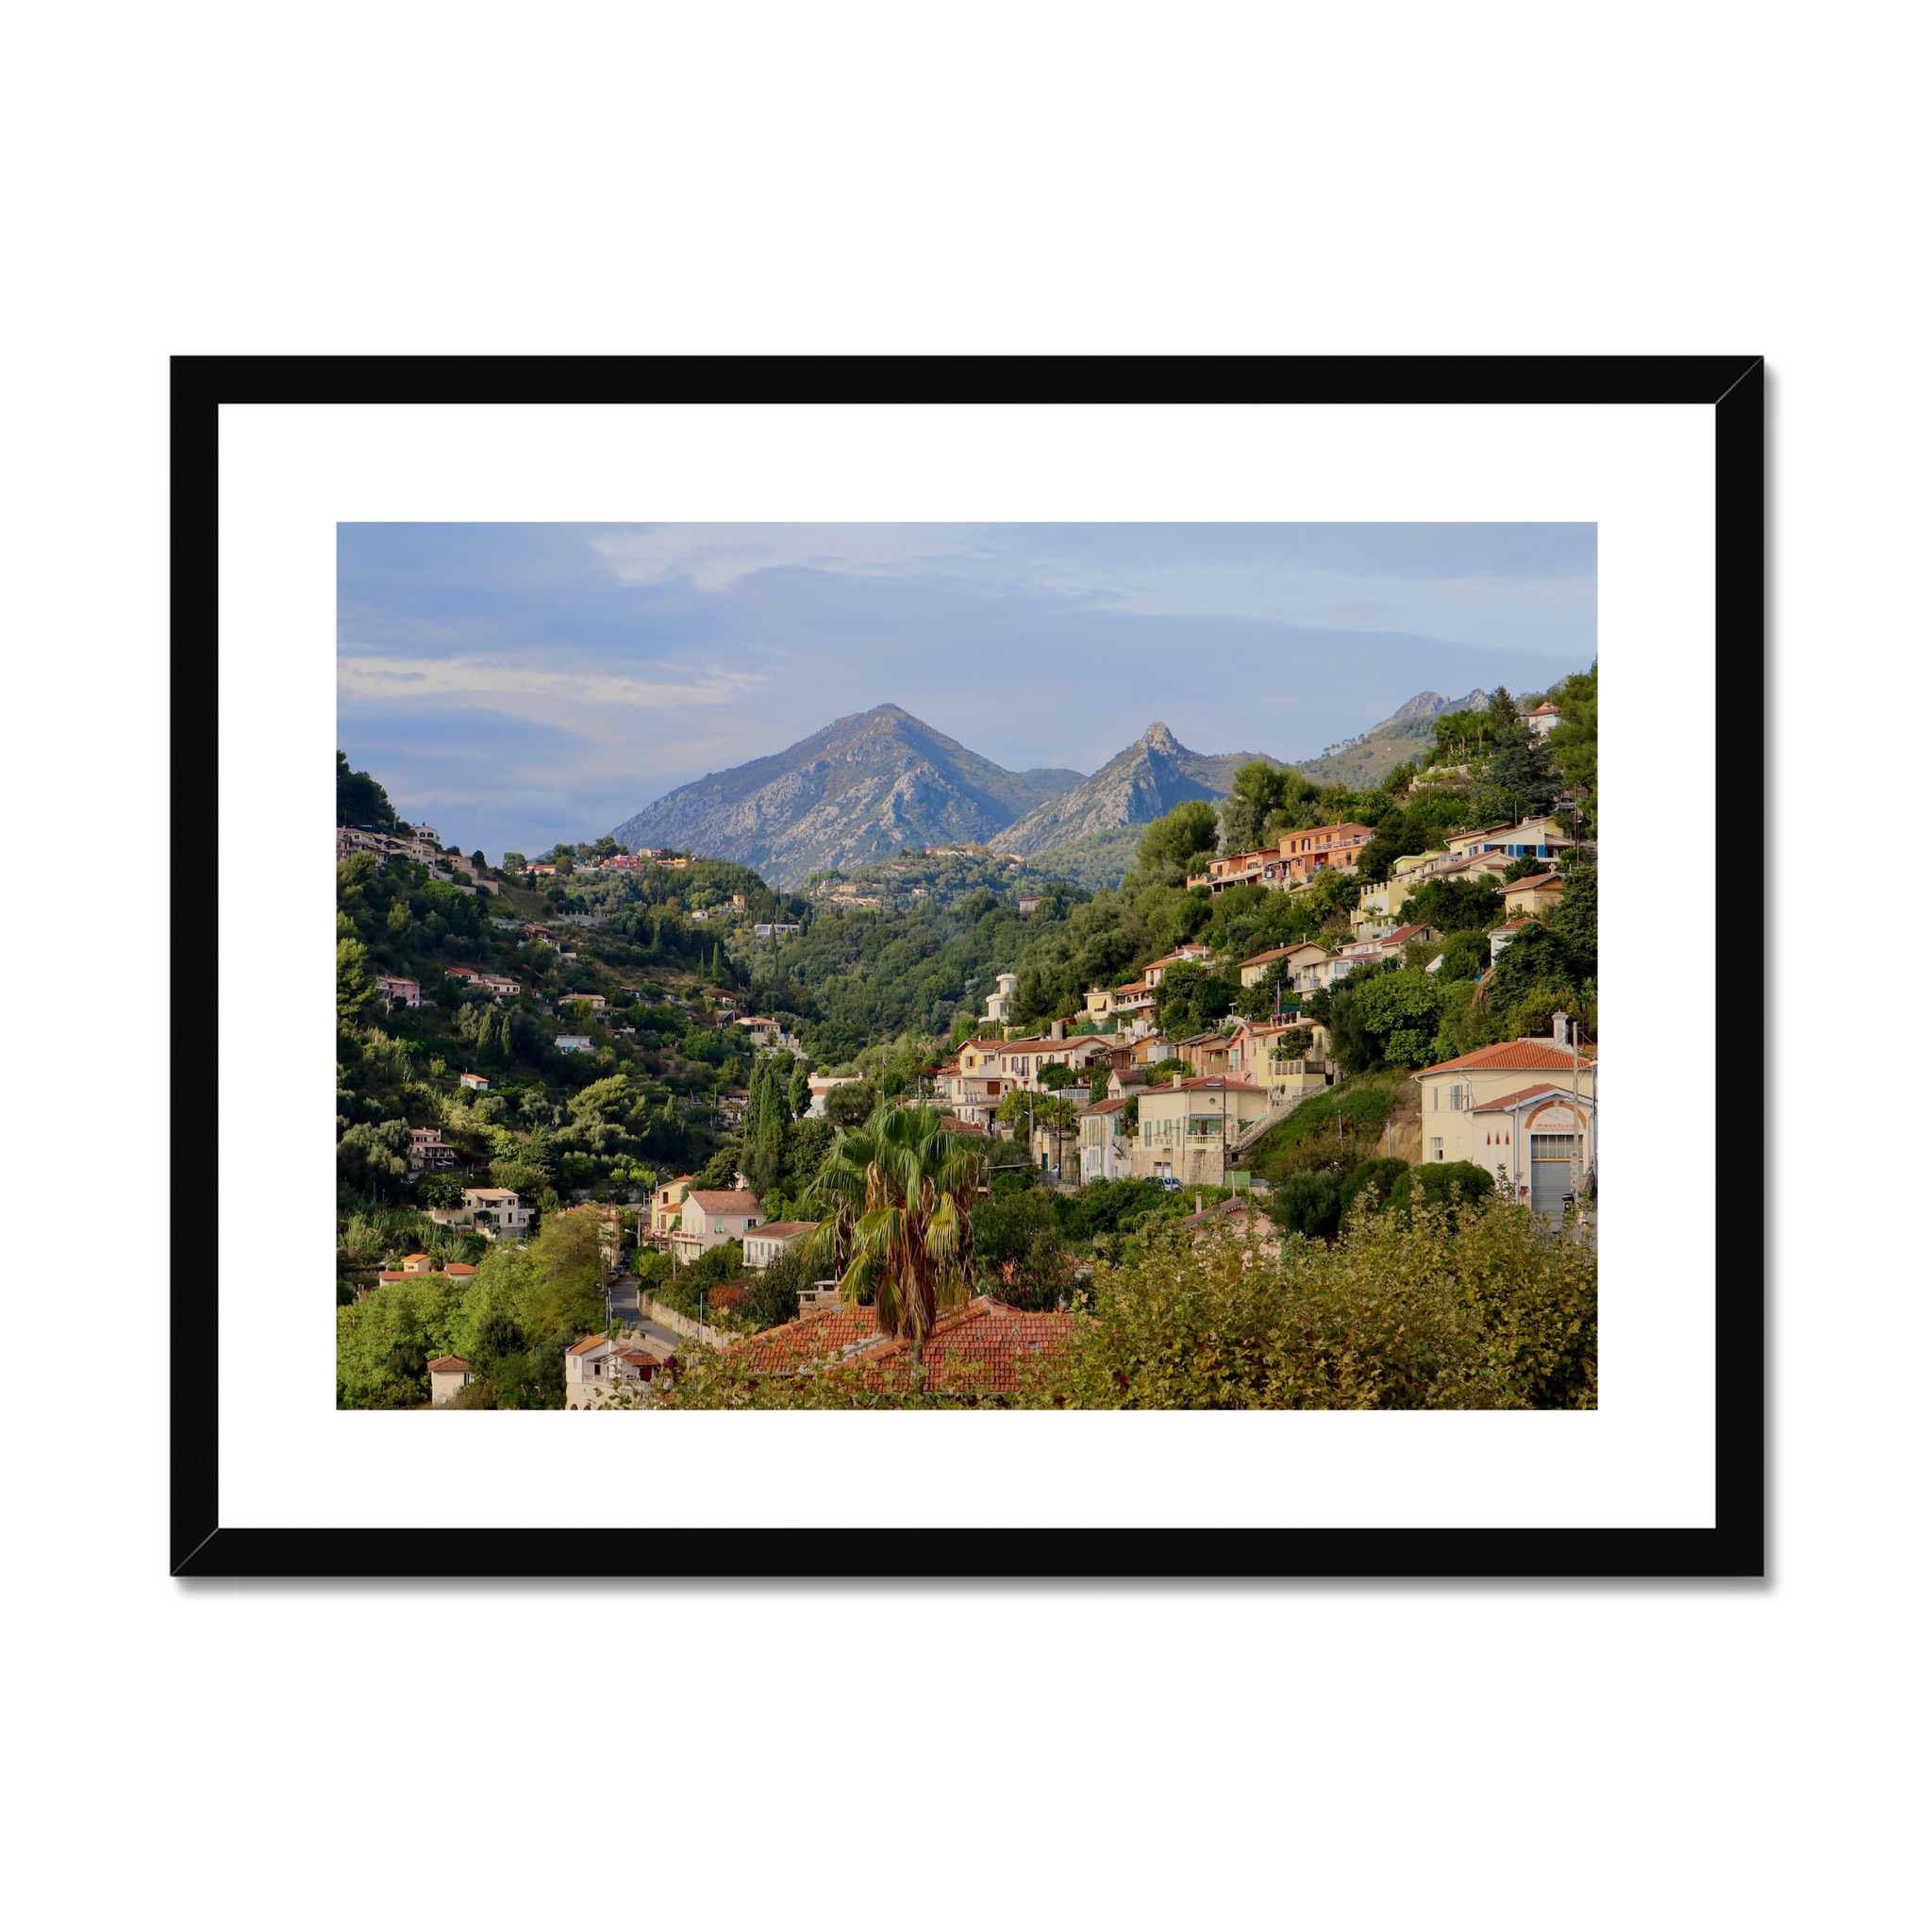 South of France Photos framed print - Houses in the hills of Menton